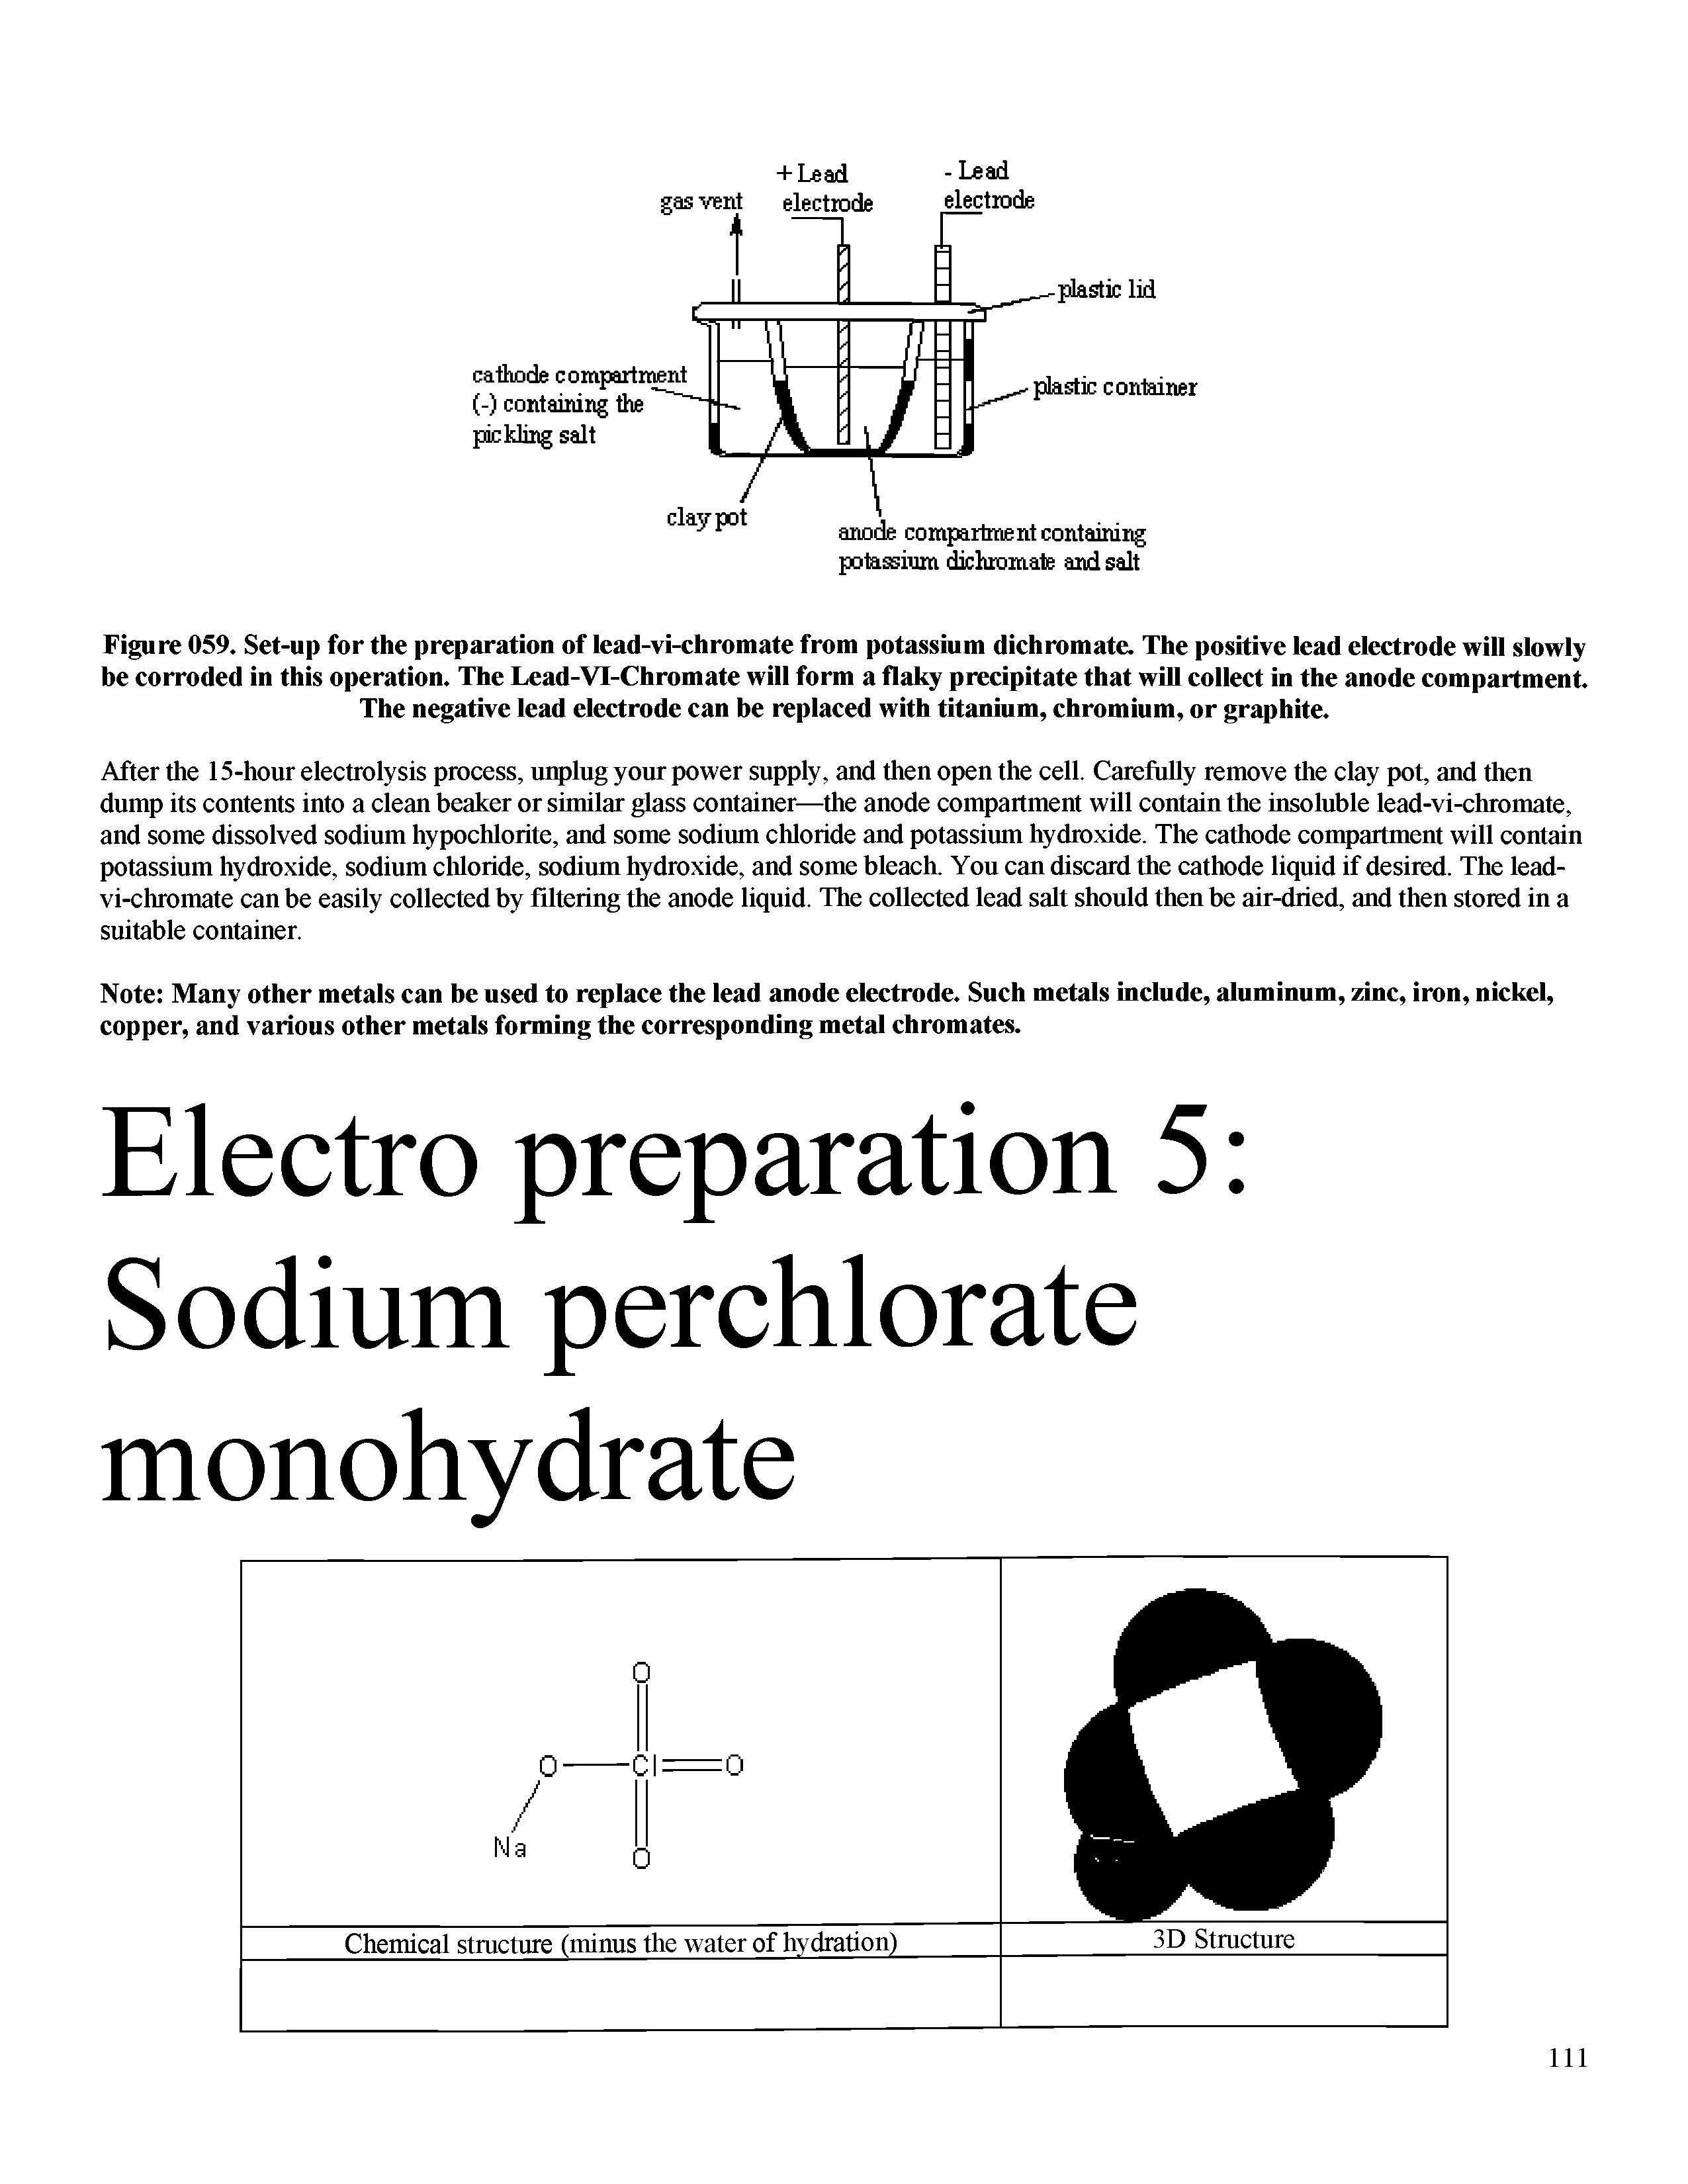 Figure 059. Set-up for the preparation of lead-vi-chromate from potassium dichromate. The positive lead electrode will slowly be corroded in this operation. The Lead-VI-Chromate will form a flaky precipitate that will collect in the anode compartment. The negative lead electrode can be replaced with titanium, chromium, or graphite.